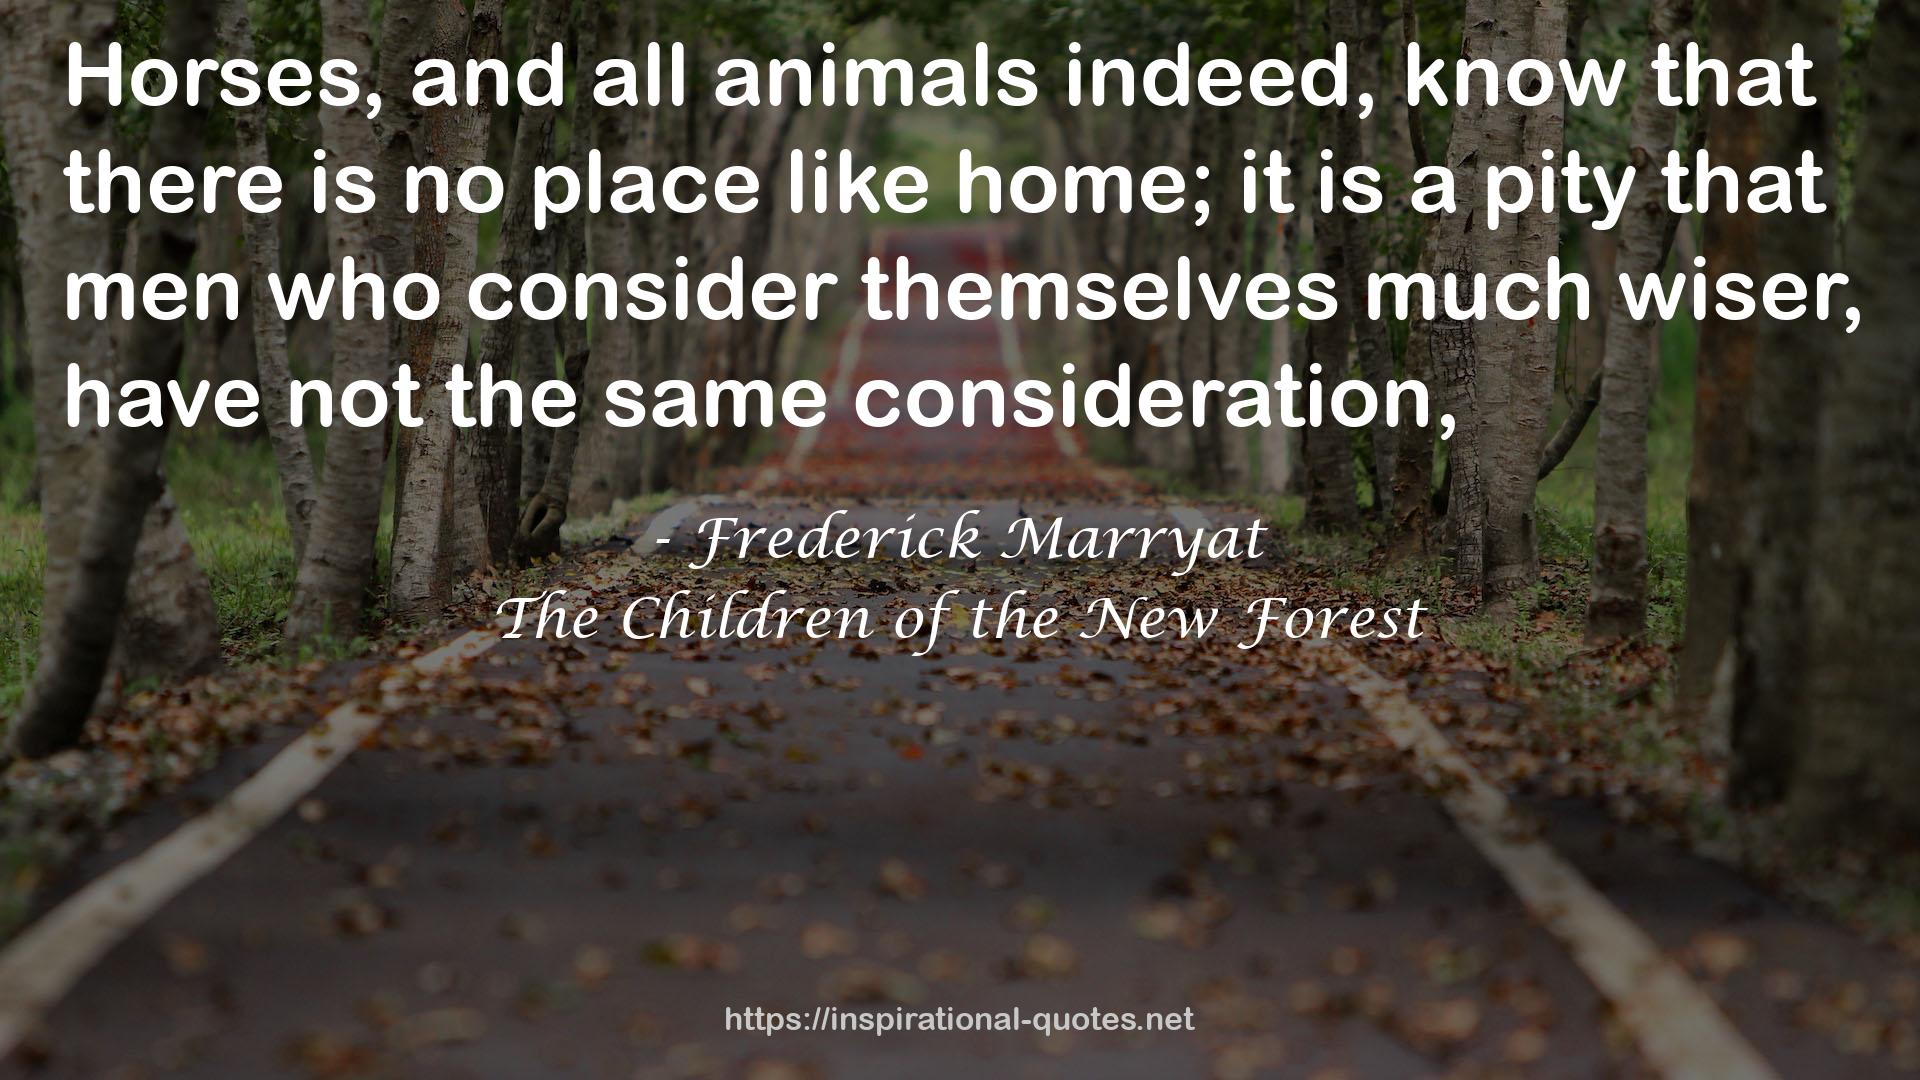 The Children of the New Forest QUOTES